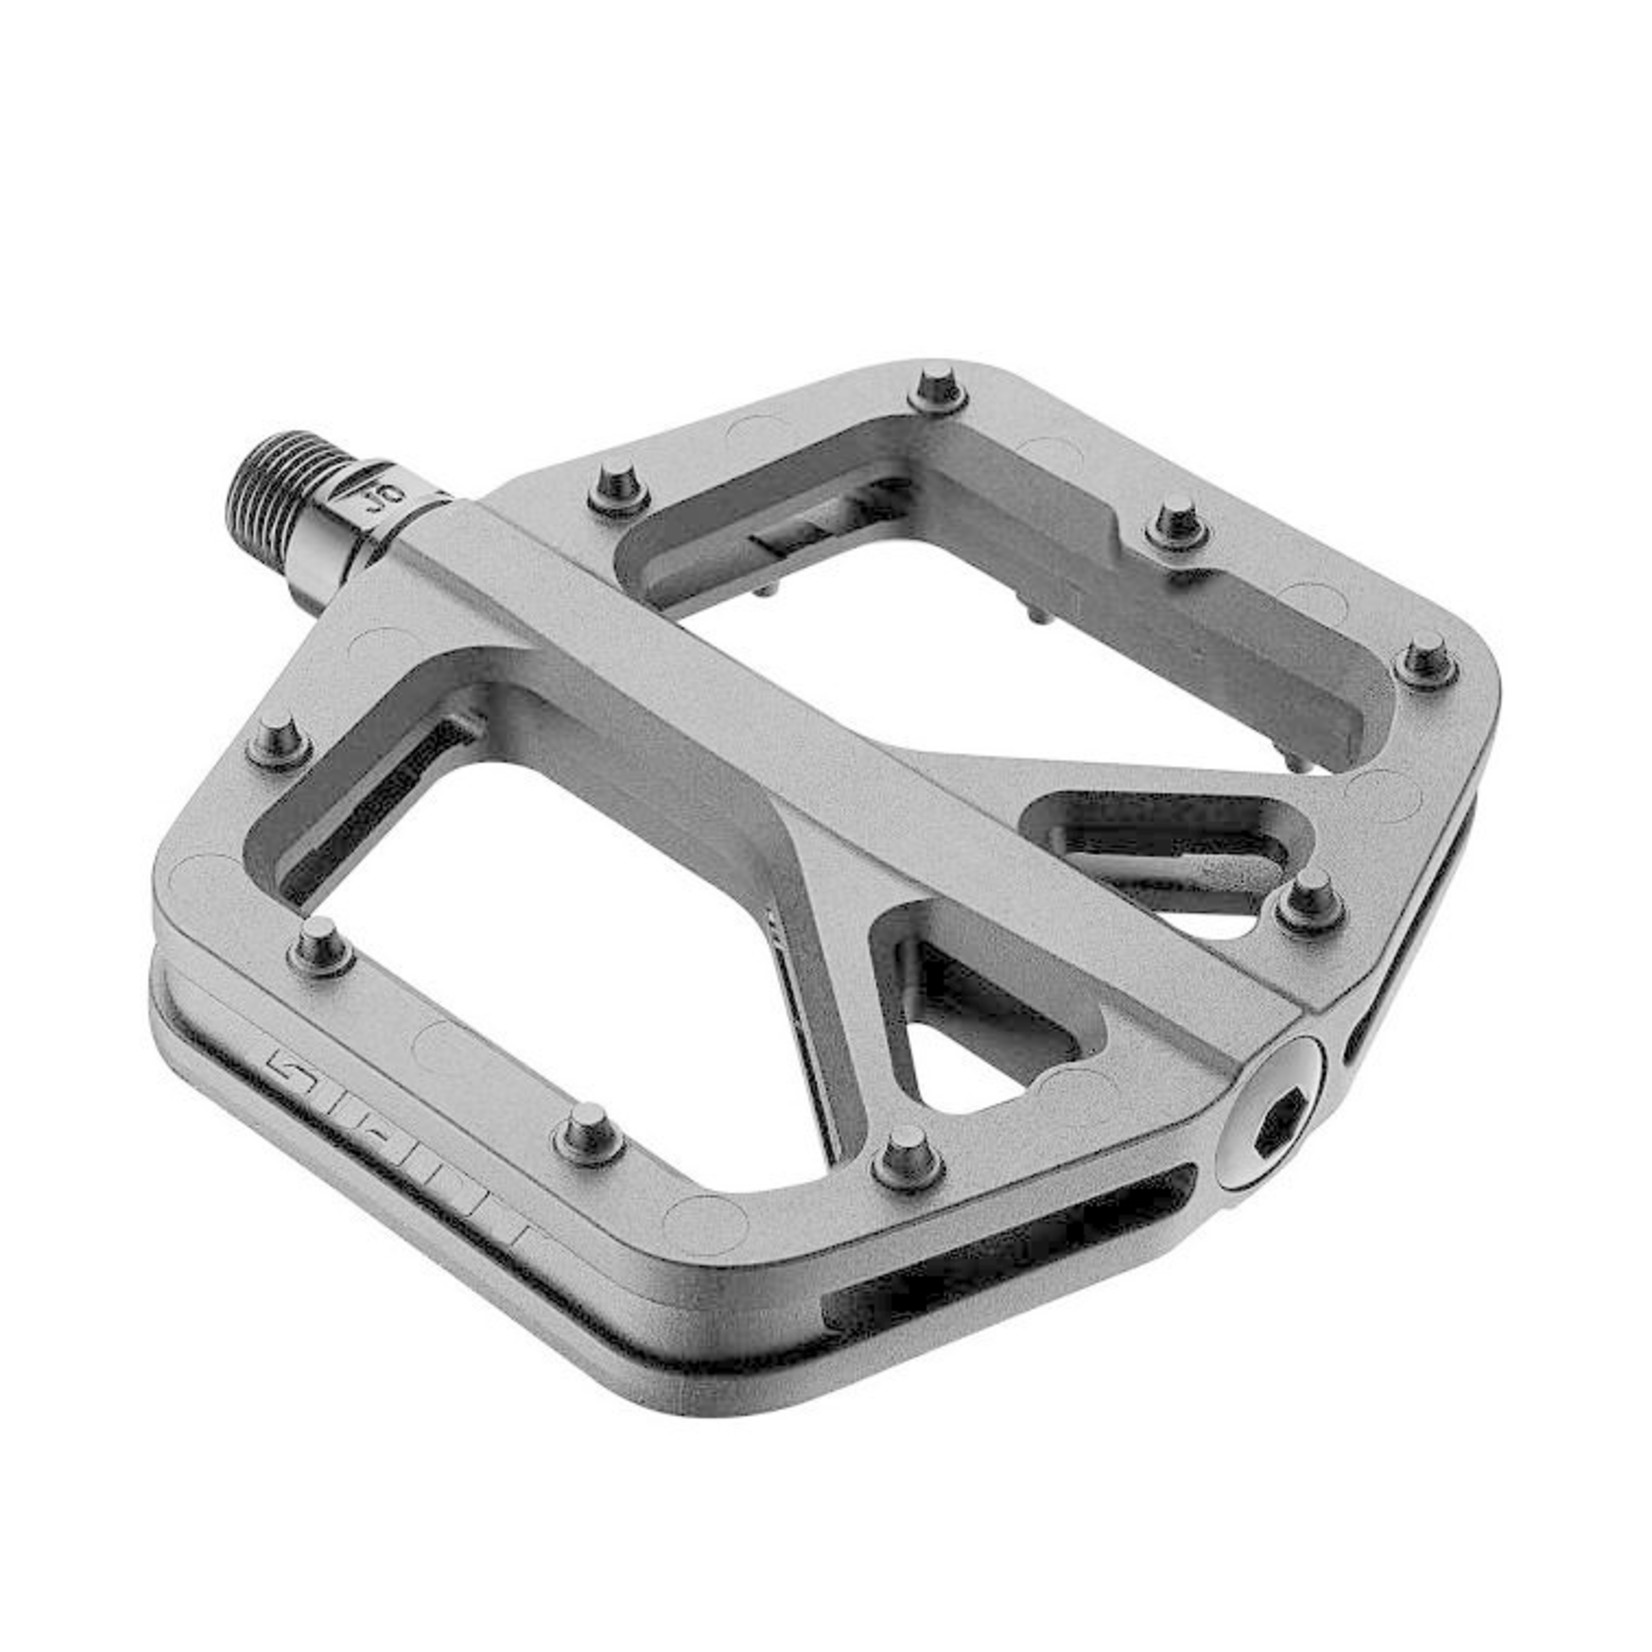 Giant Pinner Comp Pedals - Joondalup Cycle City